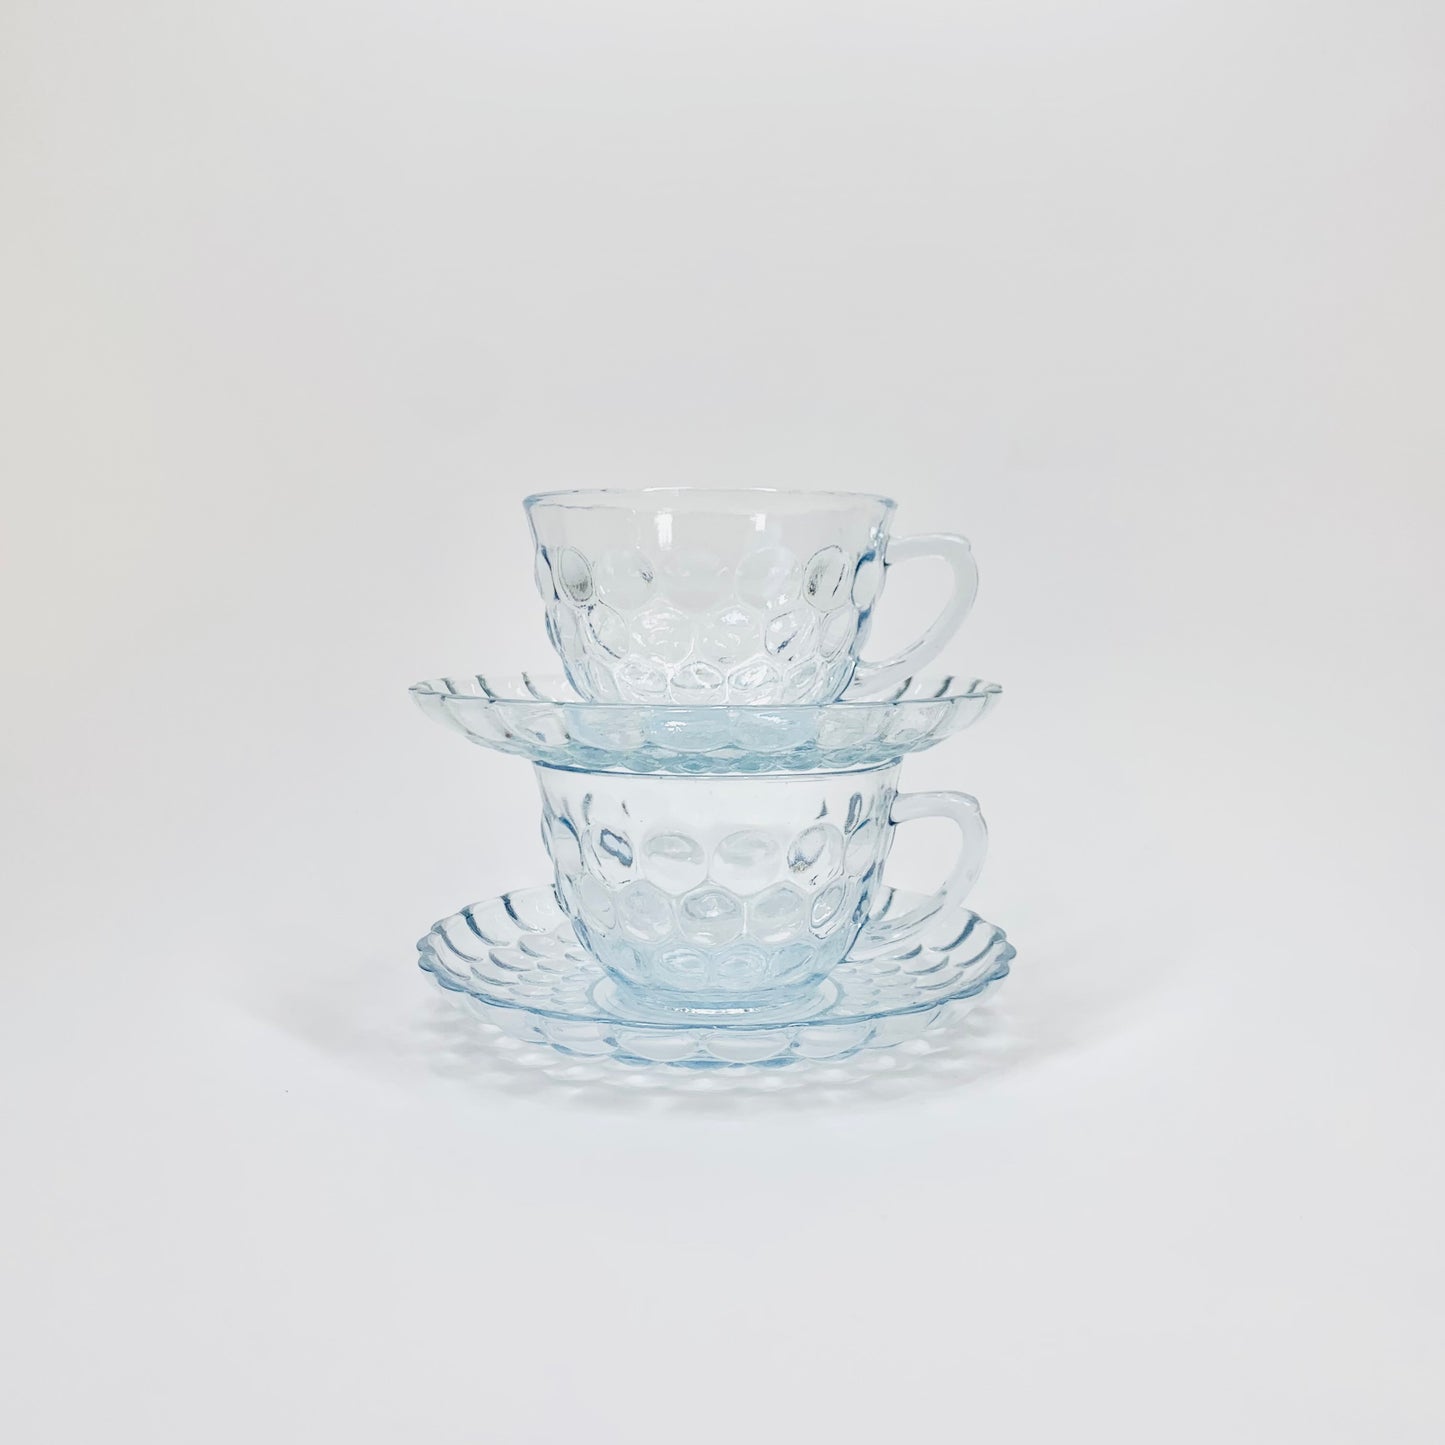 Extremely rare Arcoroc blue dimple glass tea/coffee cup and matching saucer with blue scallop rim